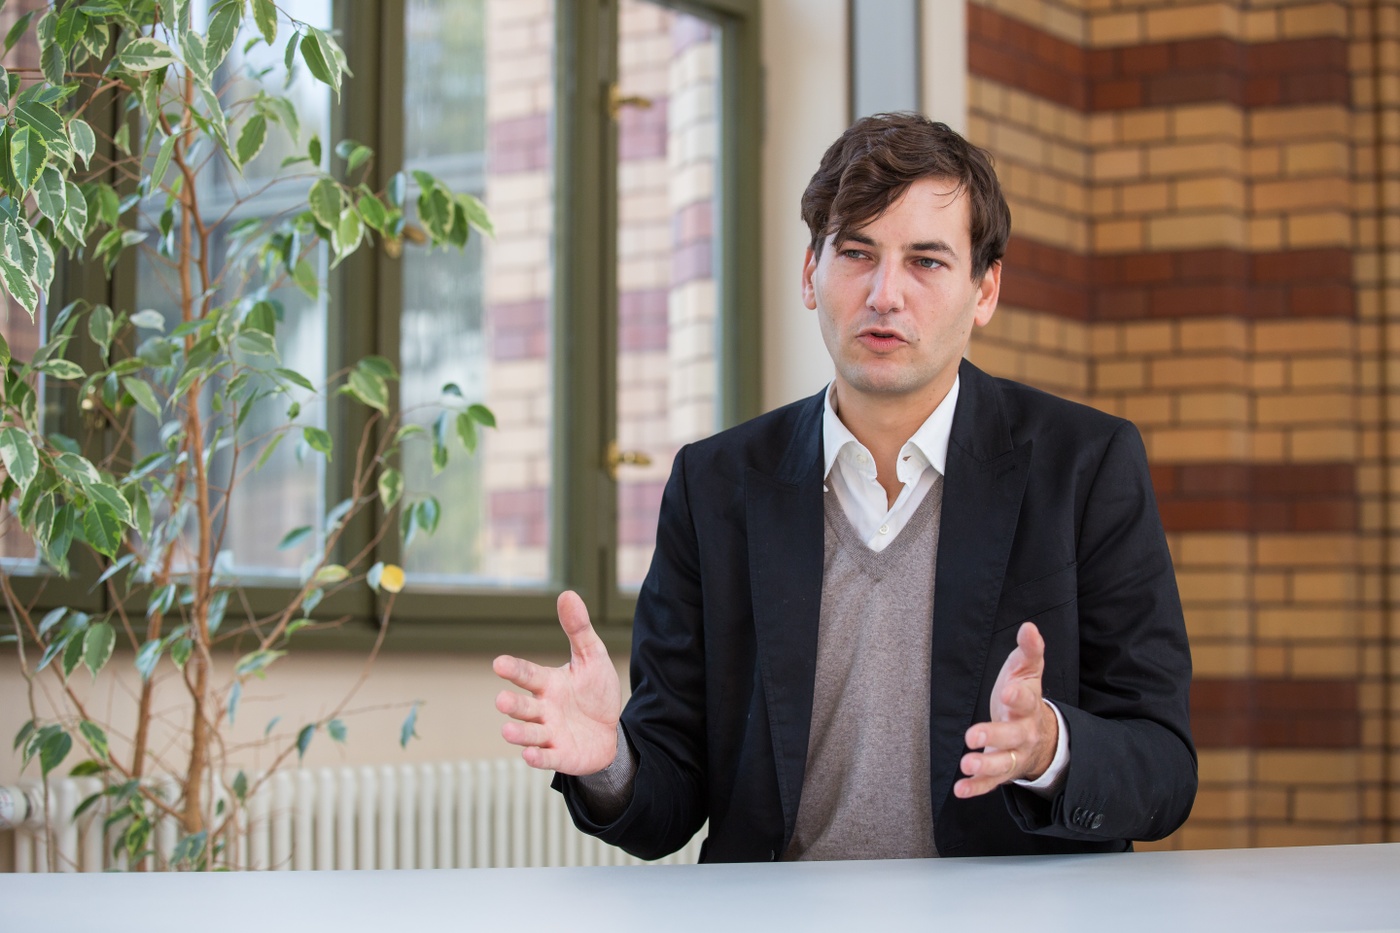 Unique Institute for Sustainability: Alexander Popp is Professor at the University of Kassel